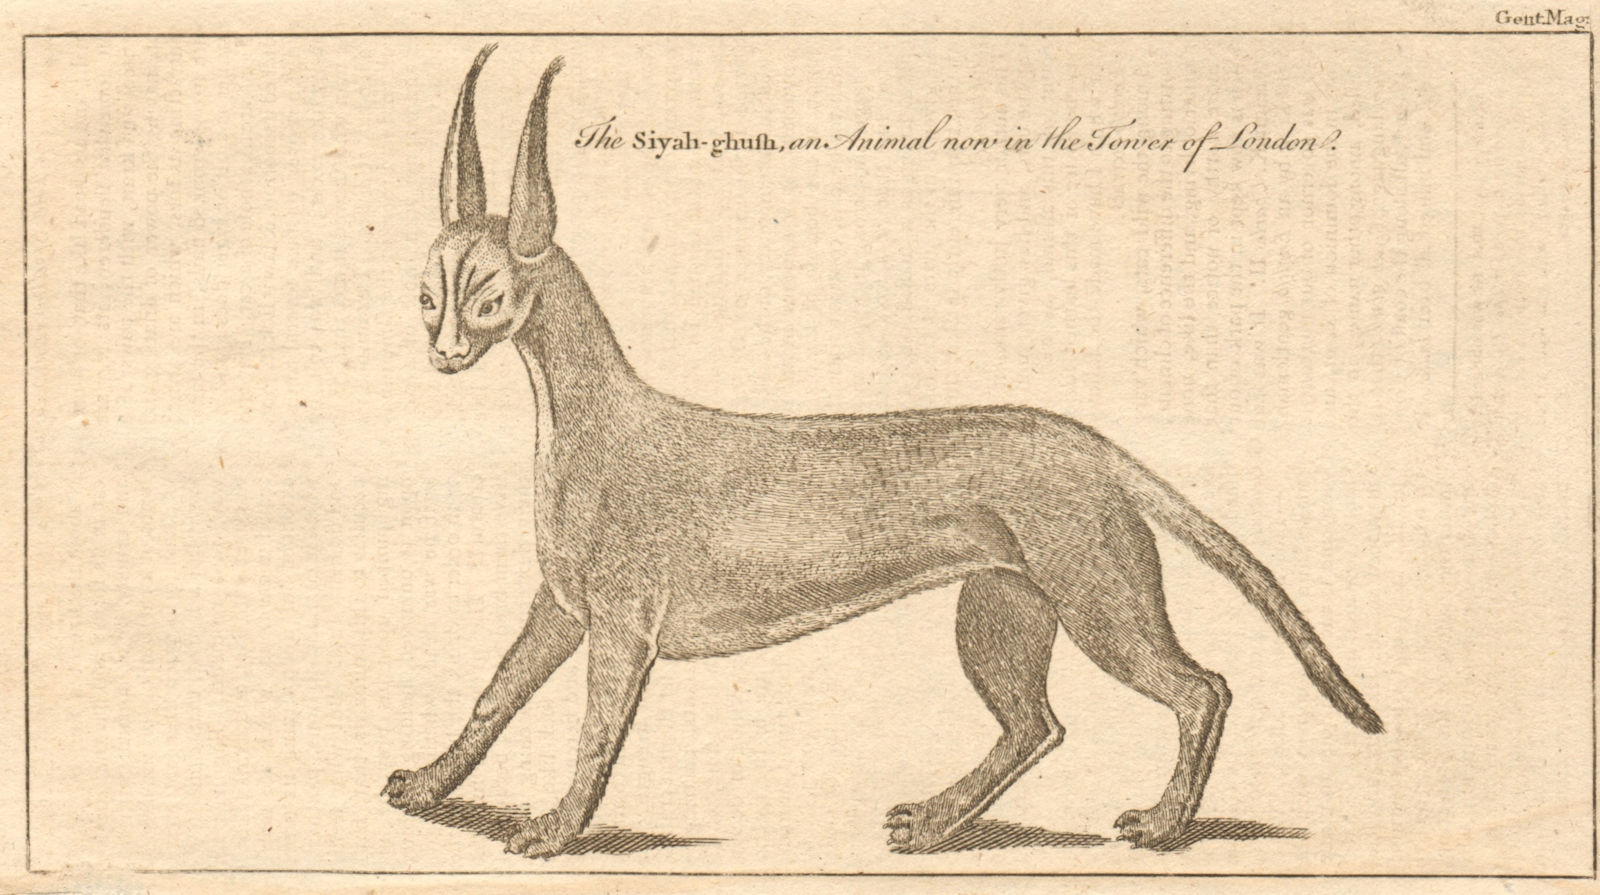 The Siyah-ghush or Lynx, an animal now in the Tower of London. Cats 1761 print